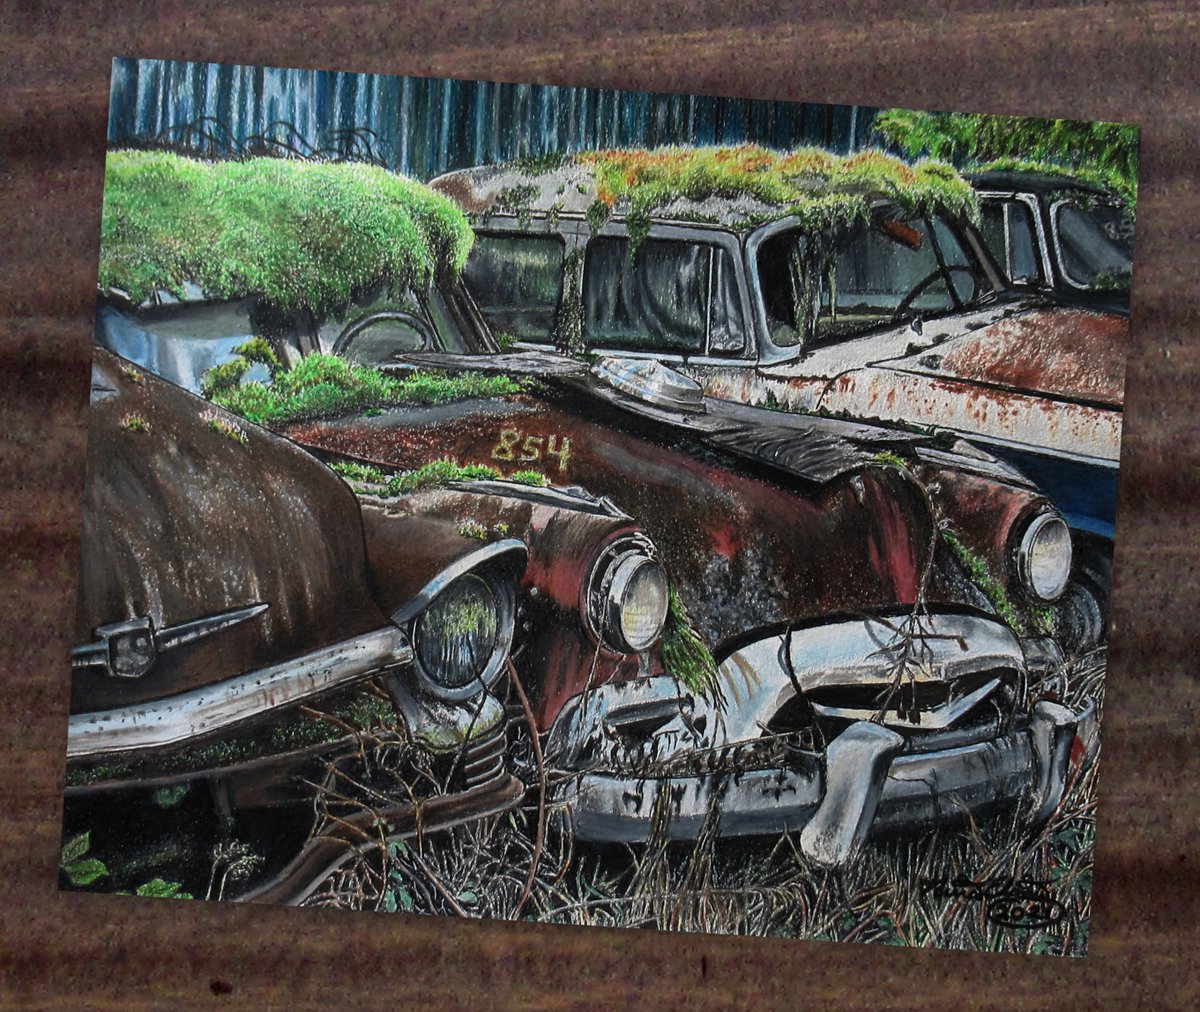 'Fading Out'
Prints from The Salvage Series
steelart.storenvy.com/collections/14…
SteelArt By N.E.Thompson

#art #prints #artprints #cars #junk #salvage #yard #classiccars #artseries #wallart #realism #artwork